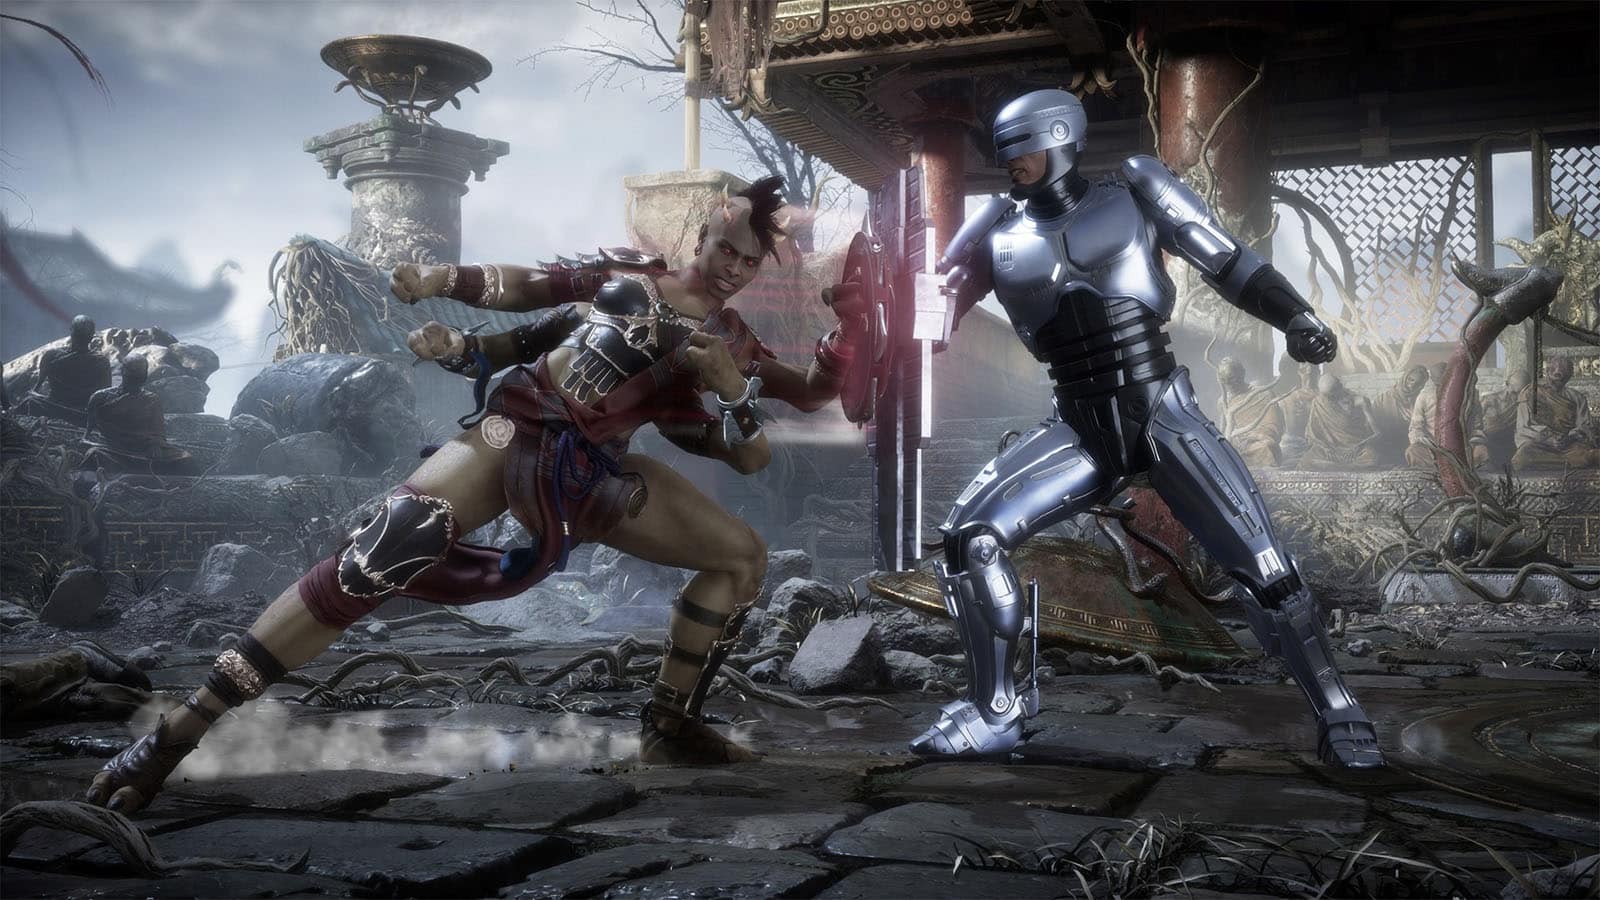 Here's A Guide To Every Fatality Input In Mortal Kombat 11